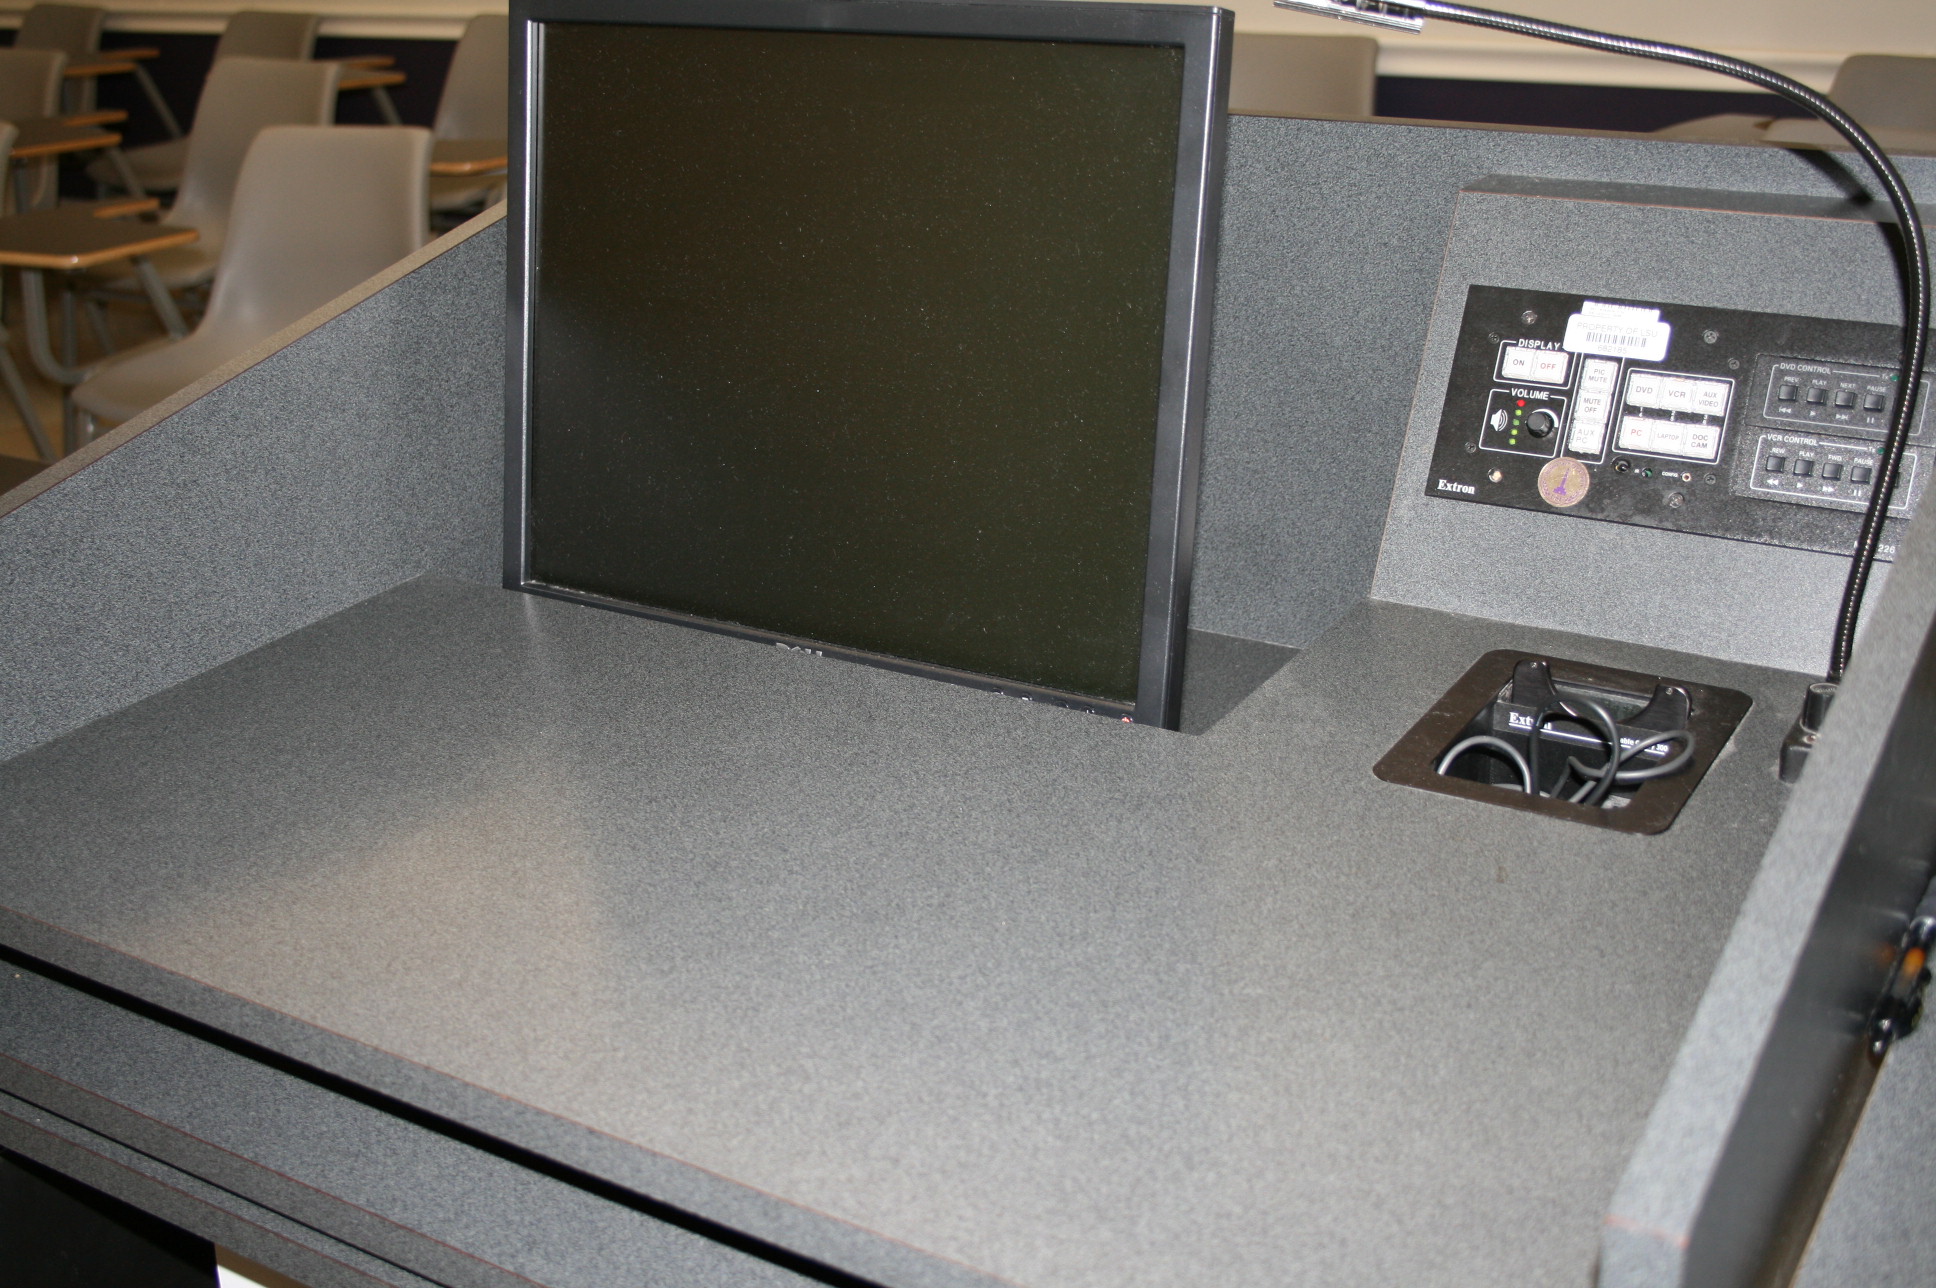 Multimedia desk available in Prescott 118 at the front